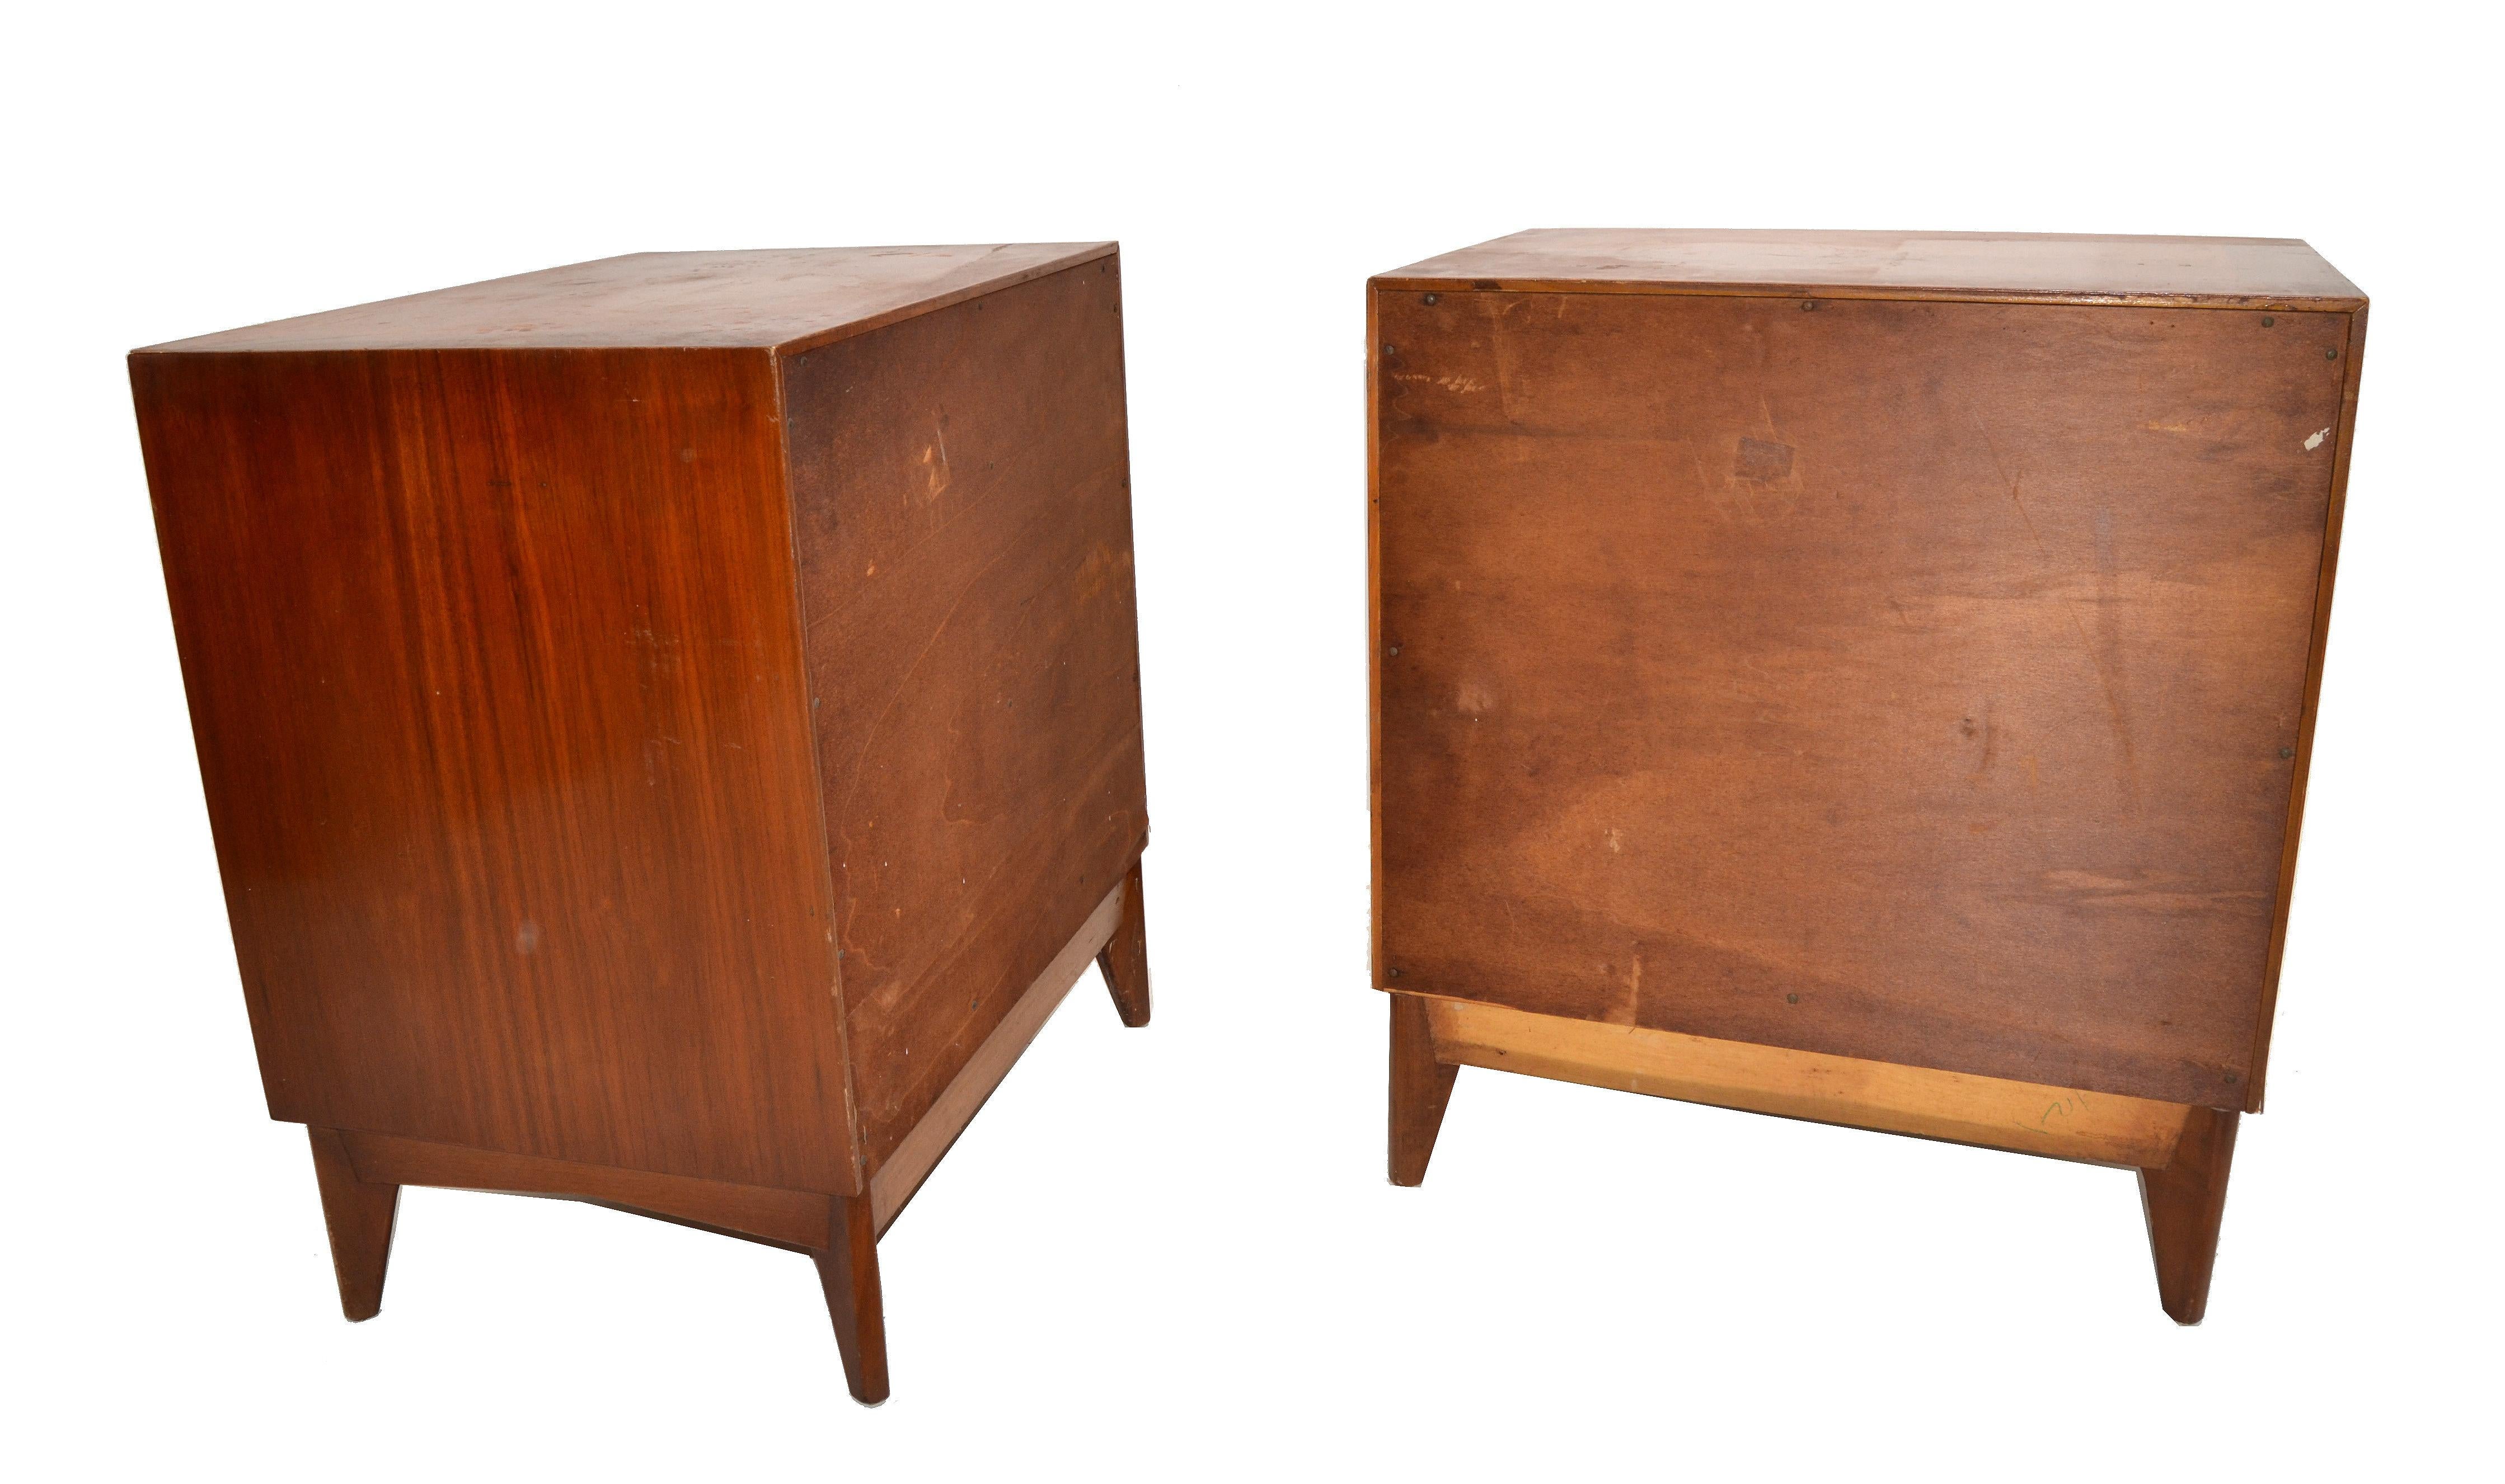 Mid-20th Century American Classic Wood Brass Night Stand Bedside Tables Mid-Century Modern - Pair For Sale